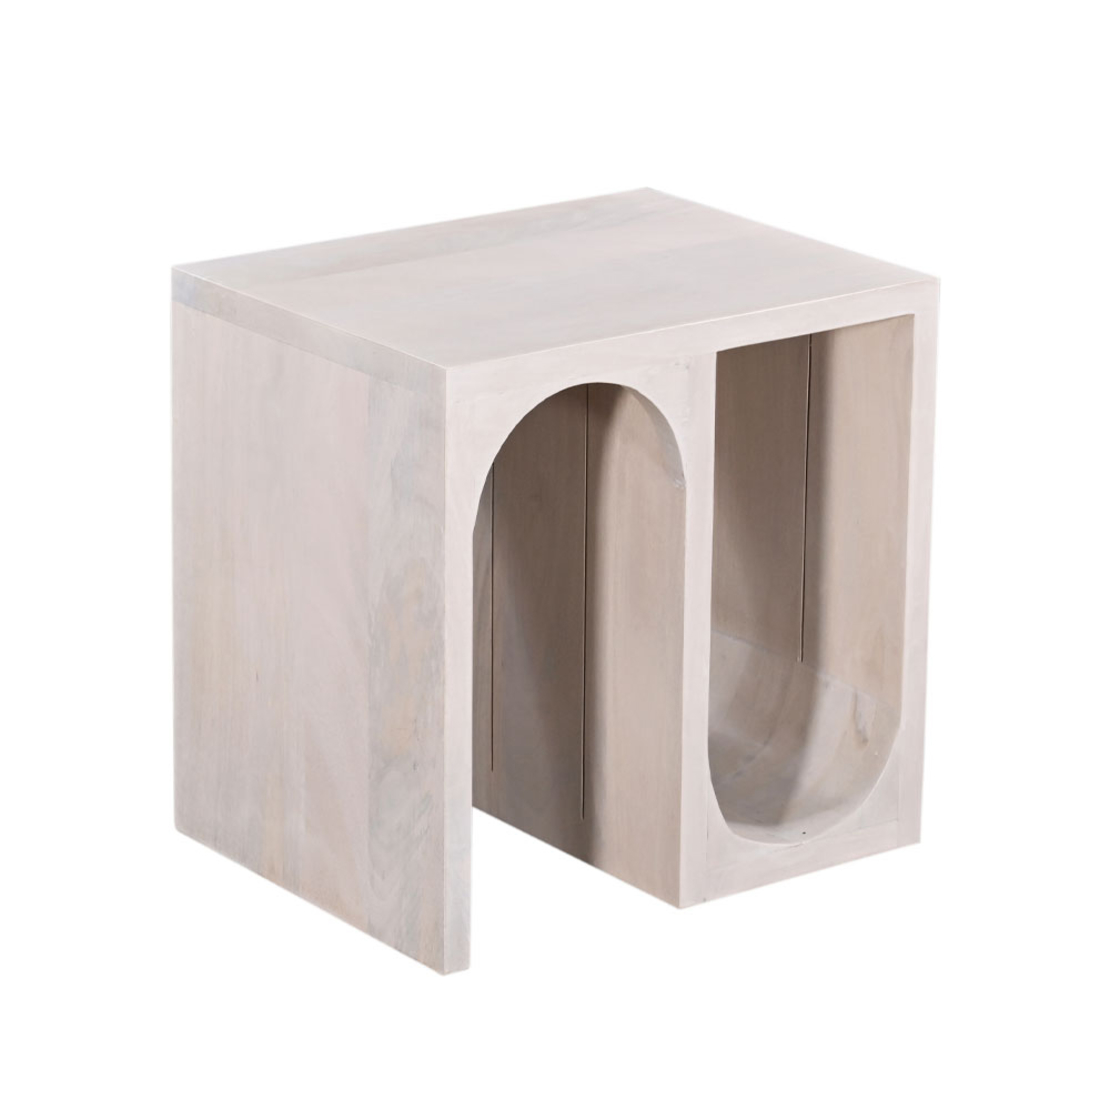 ARCH SIDE TABLE SOLID WOOD MANGO WHITE DECAPE 45x3